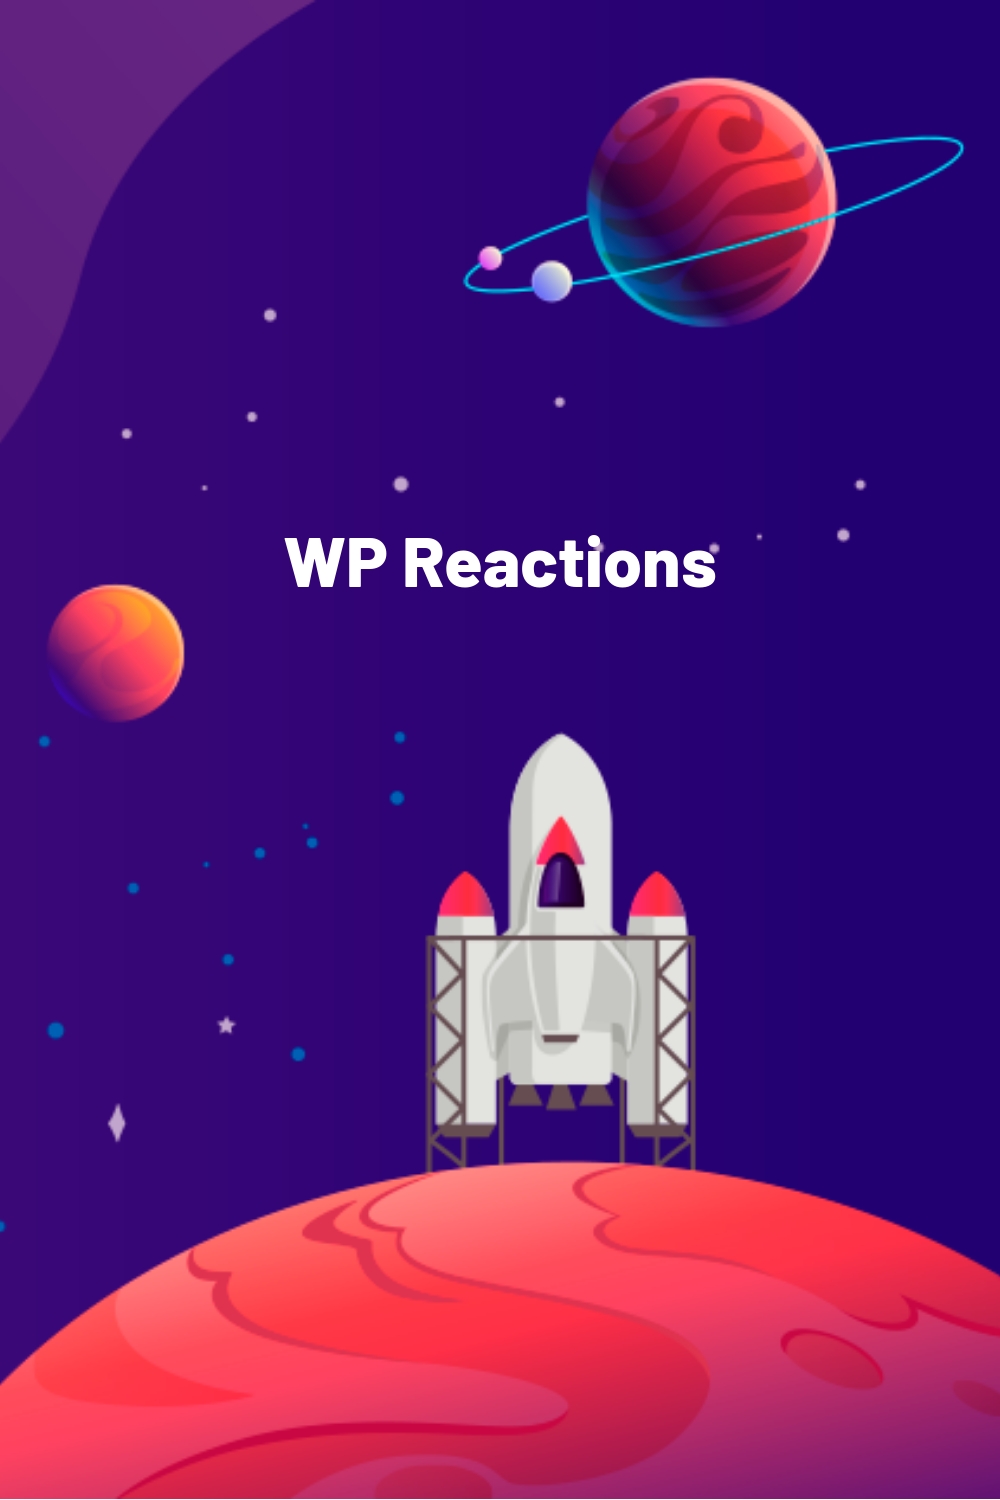 WP Reactions